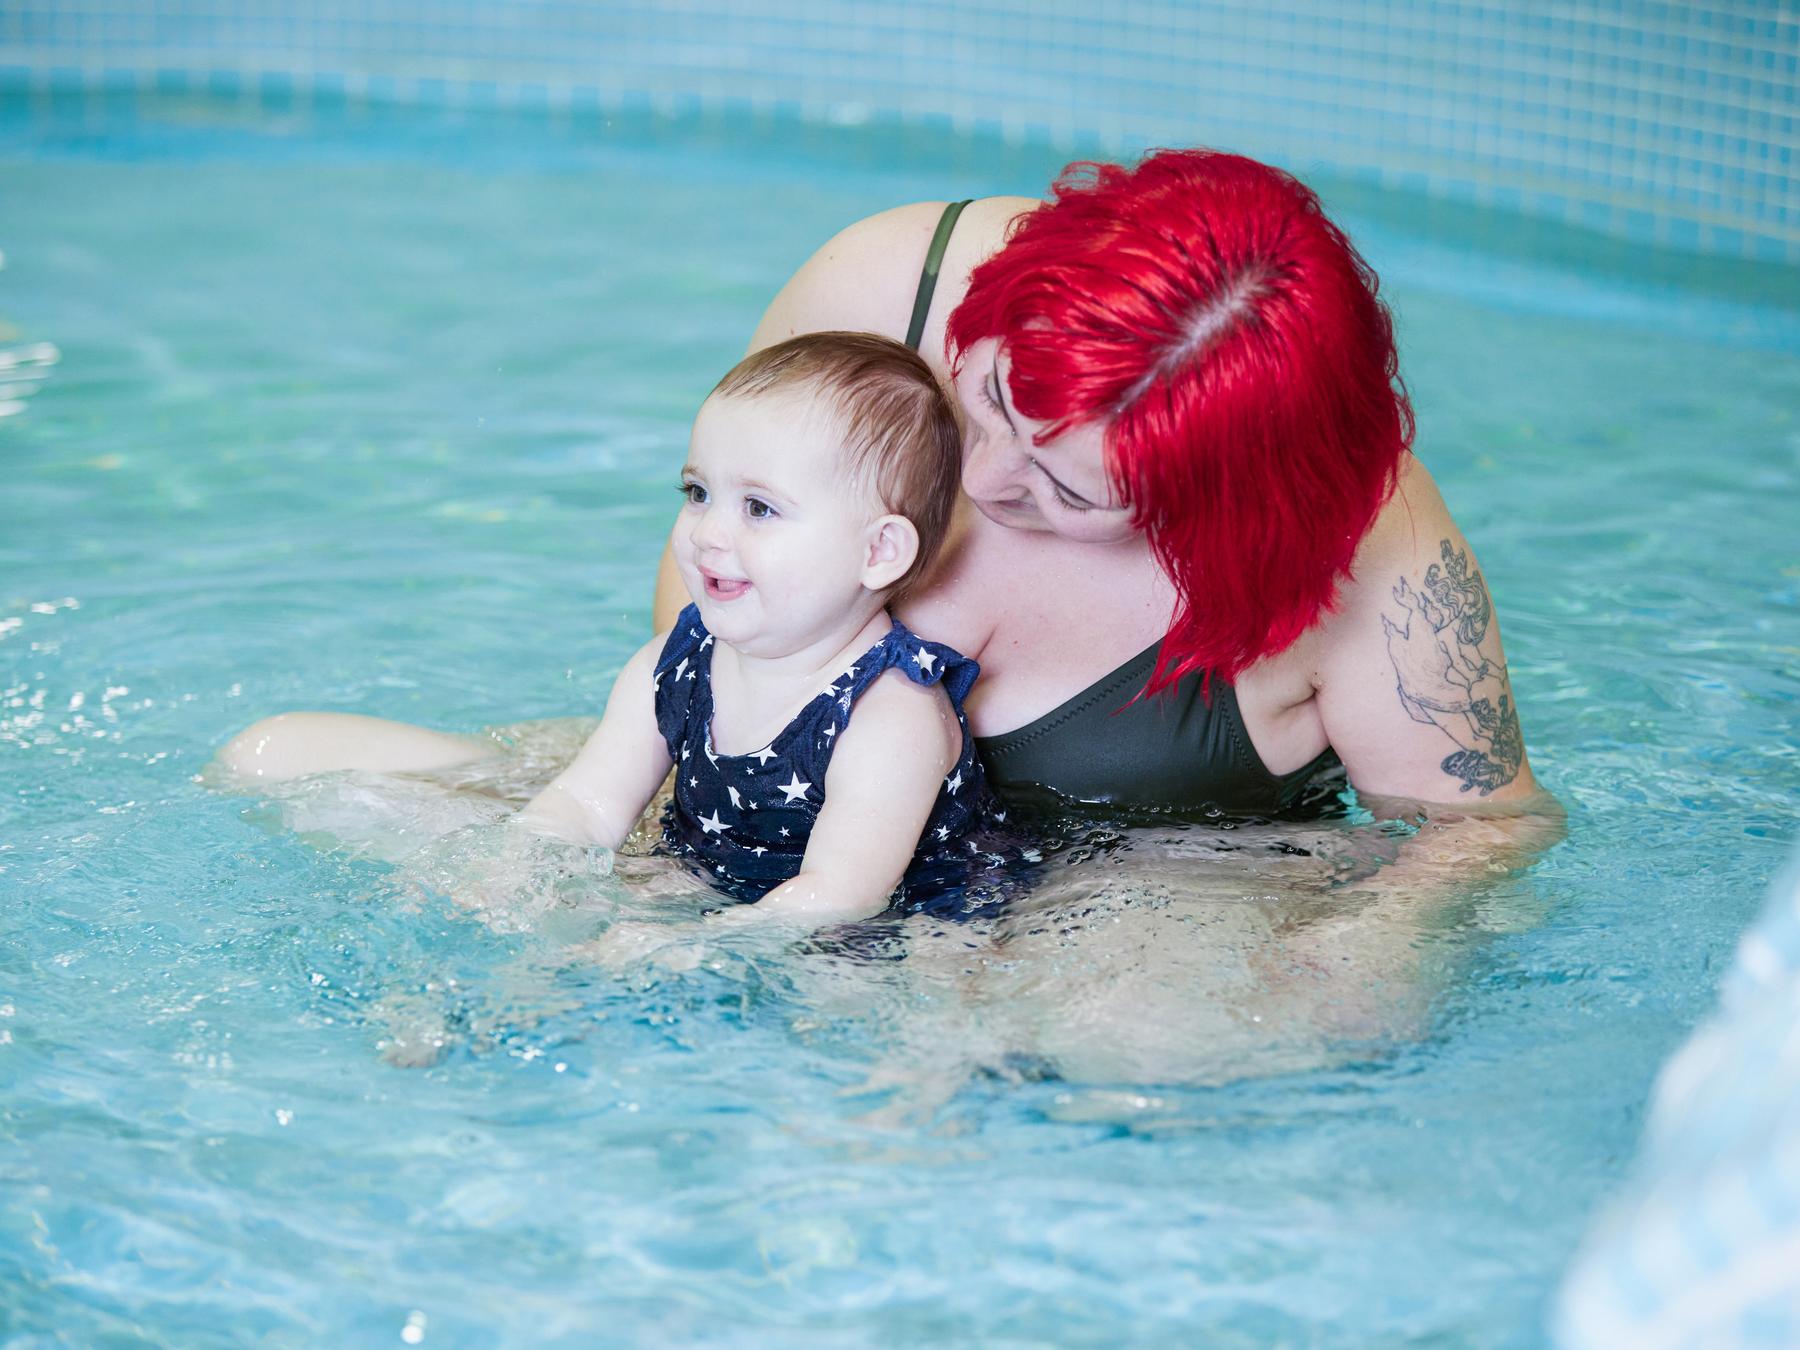 Parent and child play together in pool